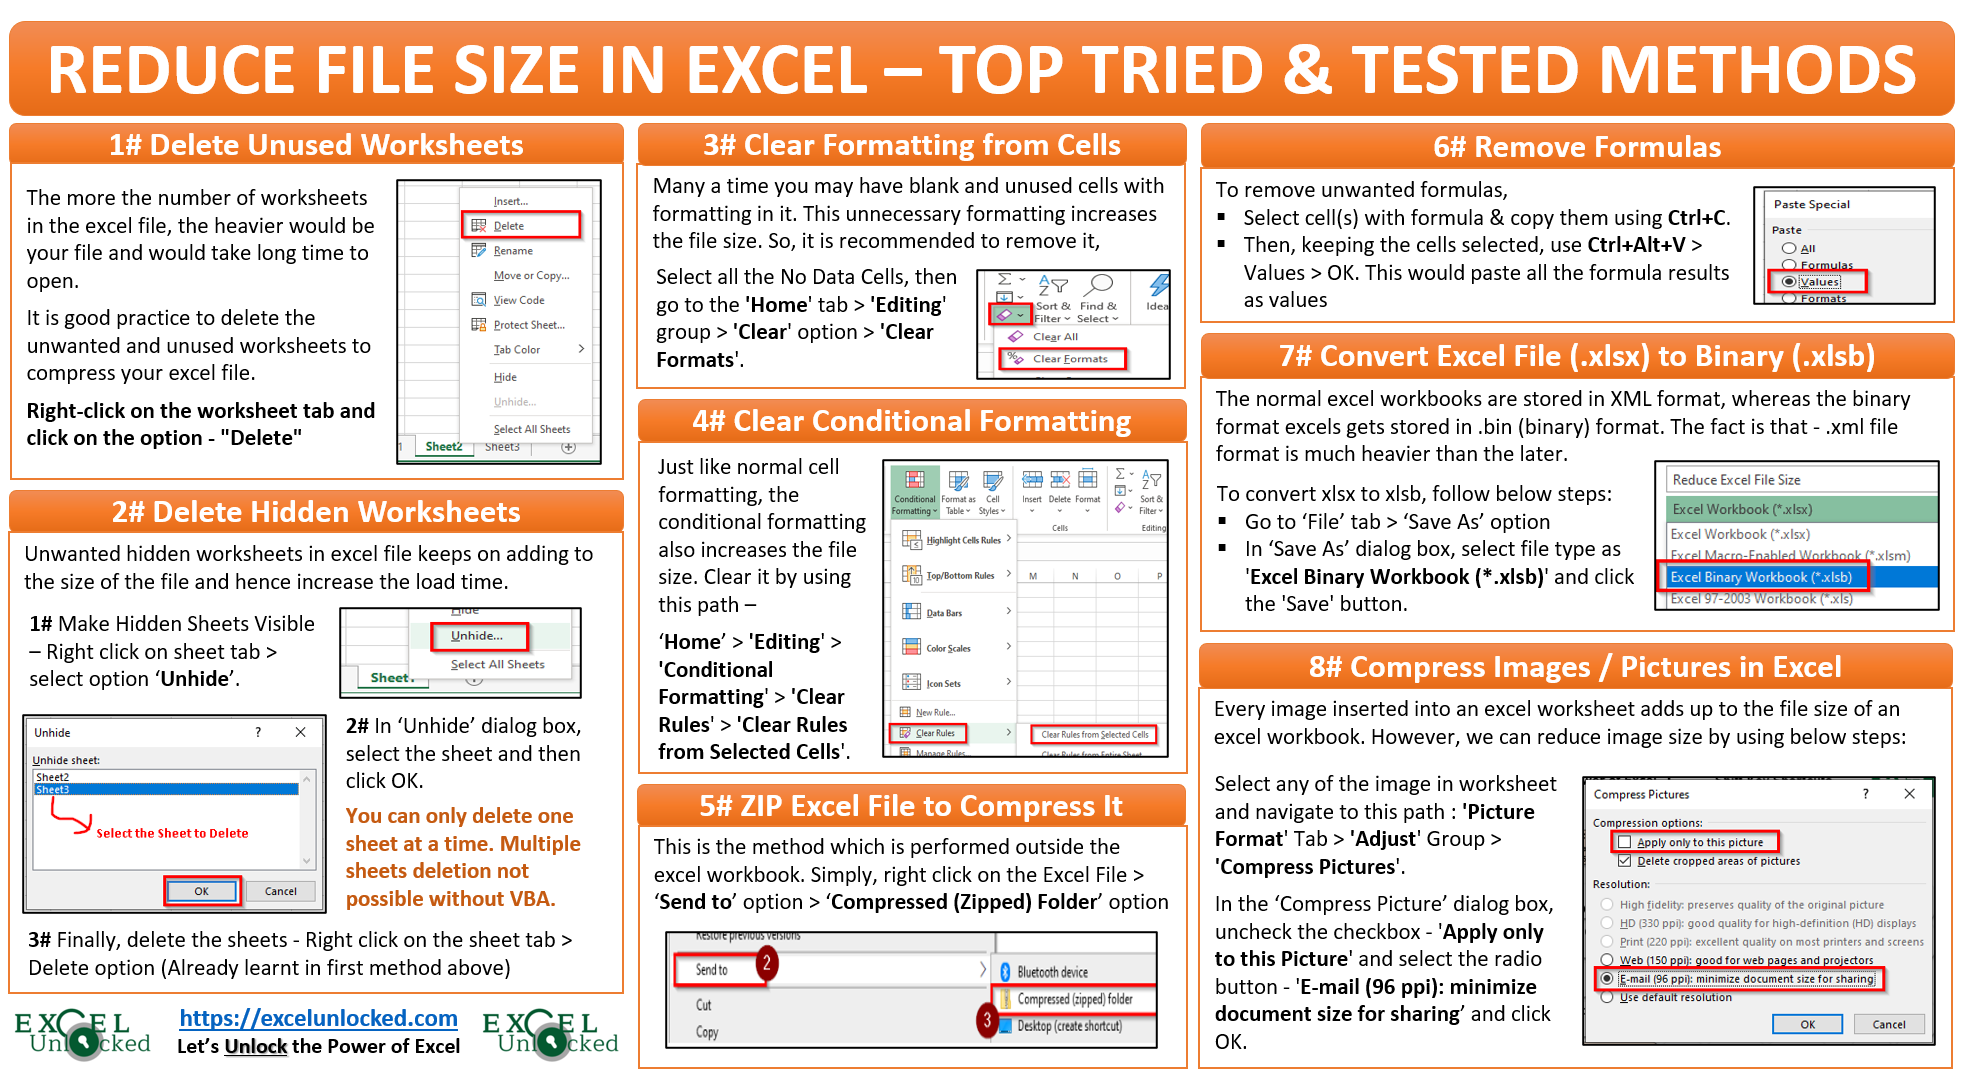 Reduce Excel File Size